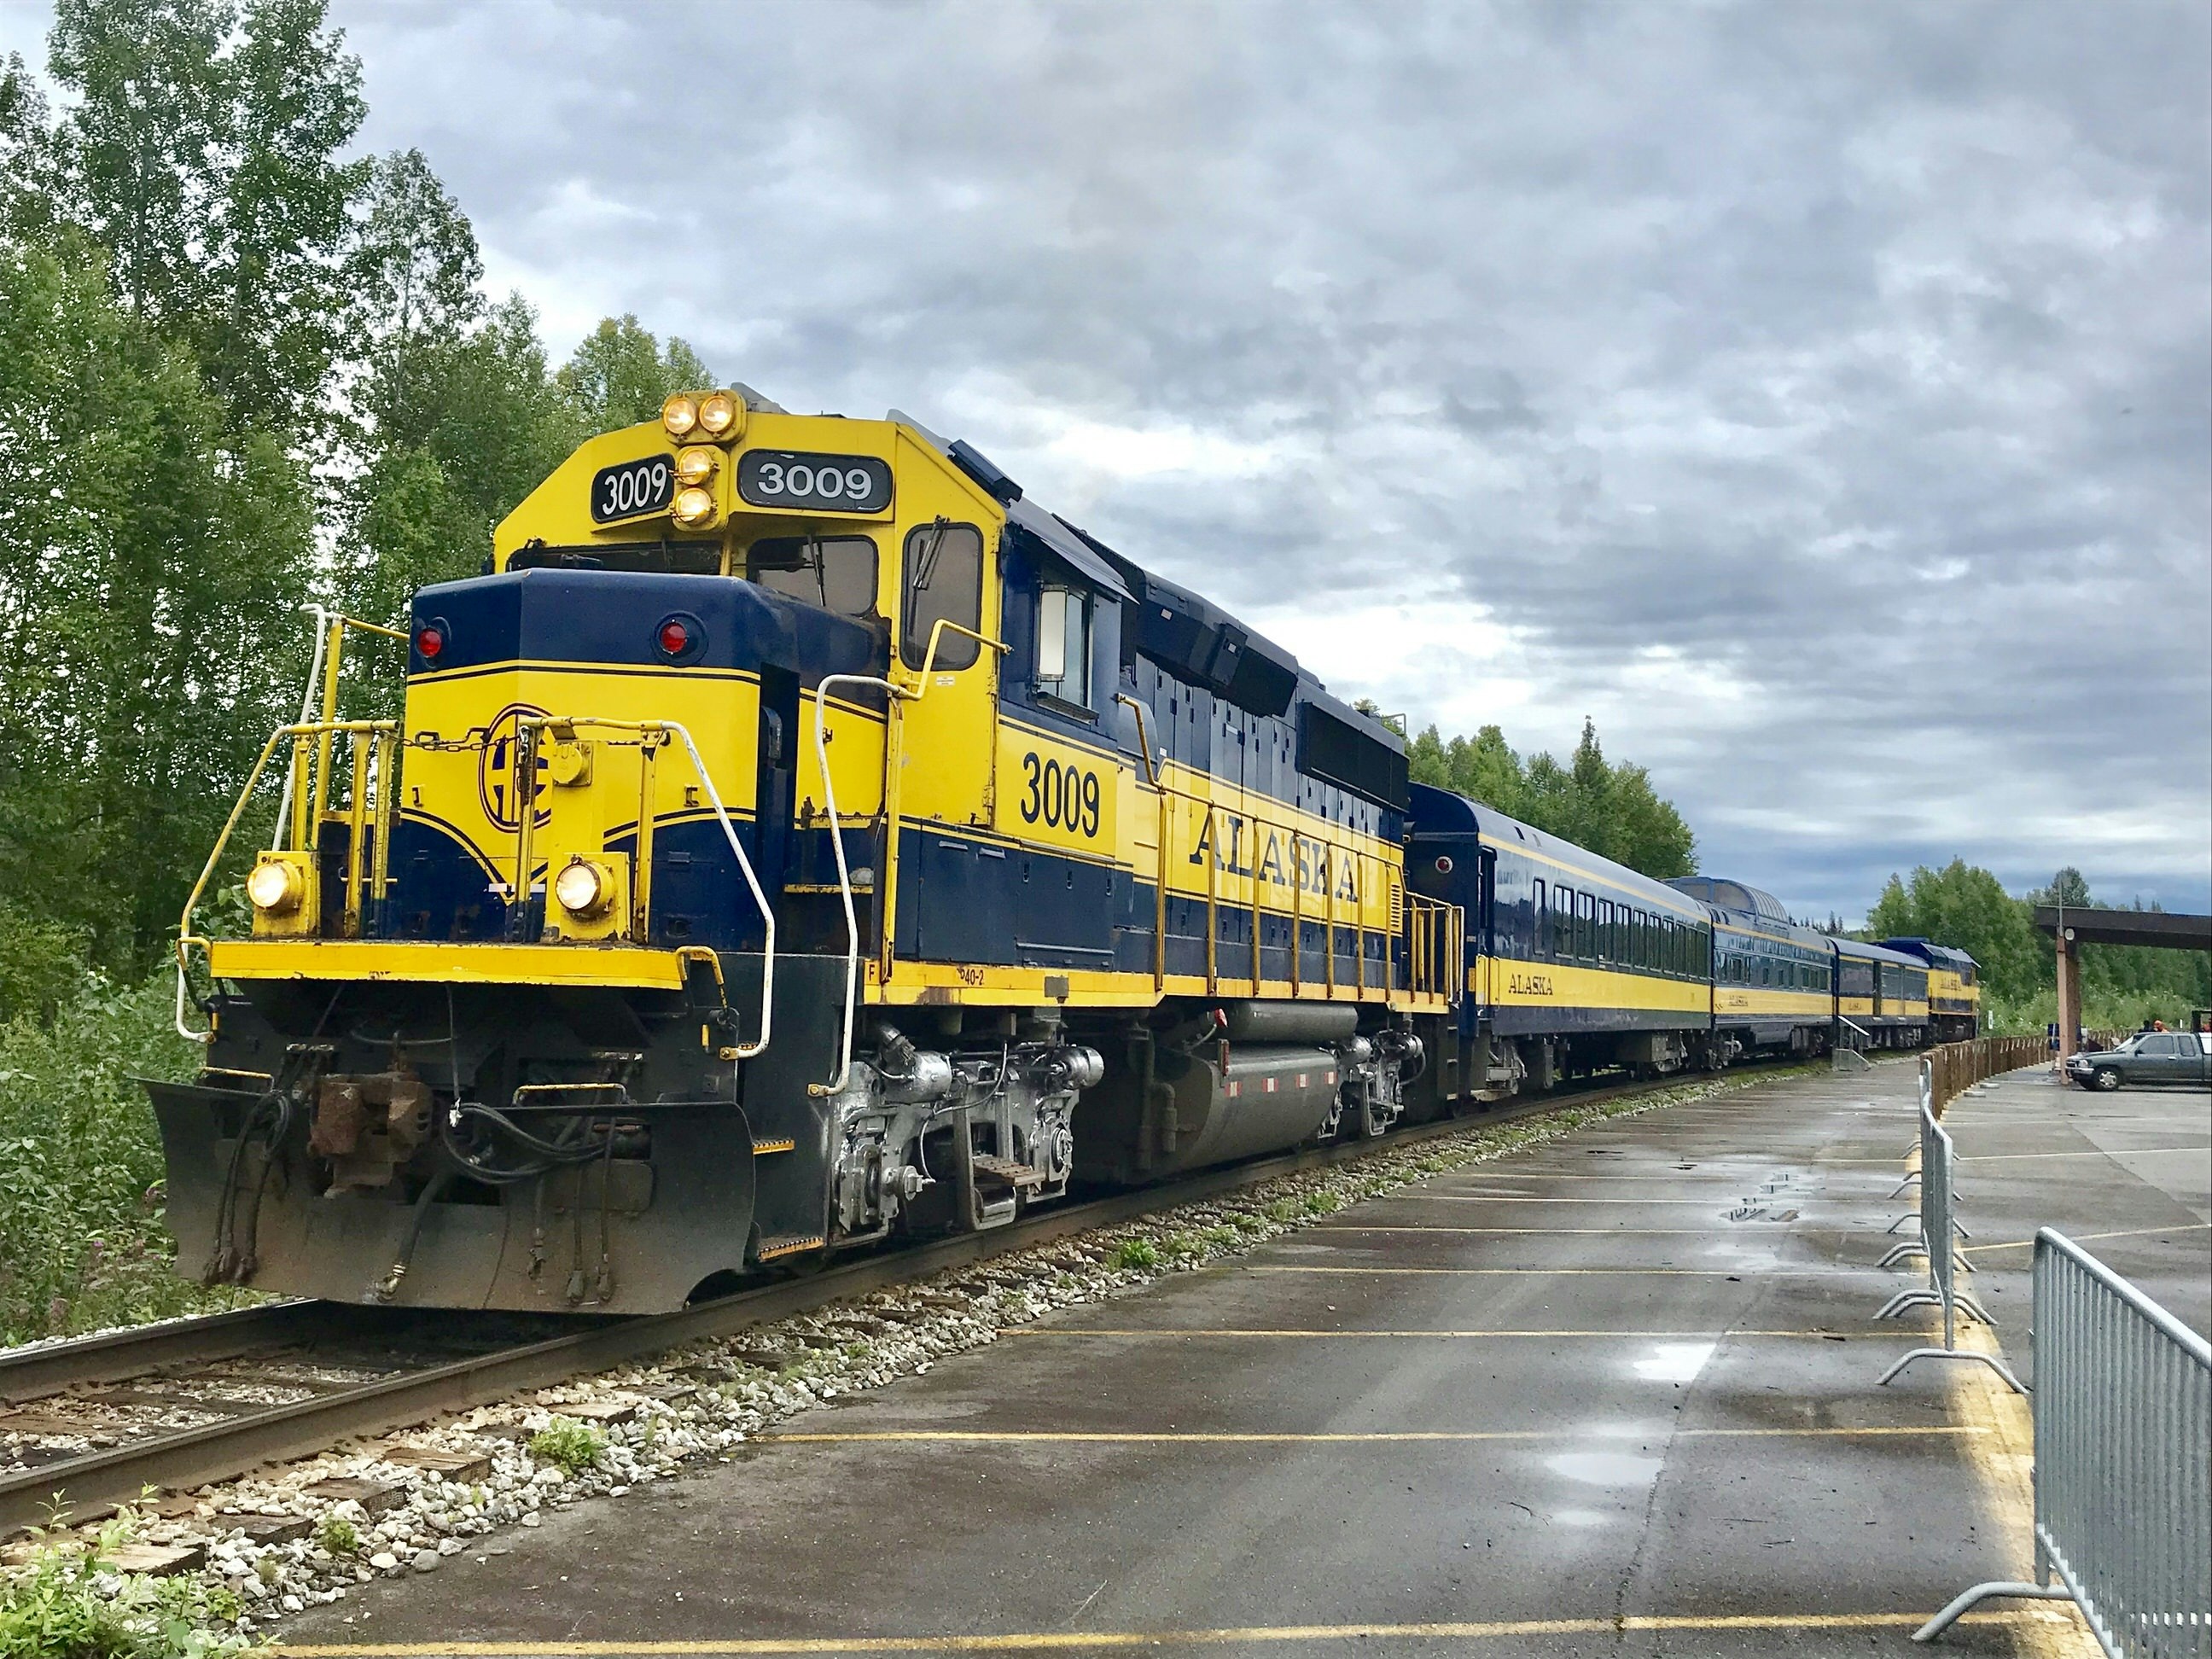 A sturdy navy and yellow train, standing on a platform. On the side of the front car, 'Alaska' is written in yellow letters